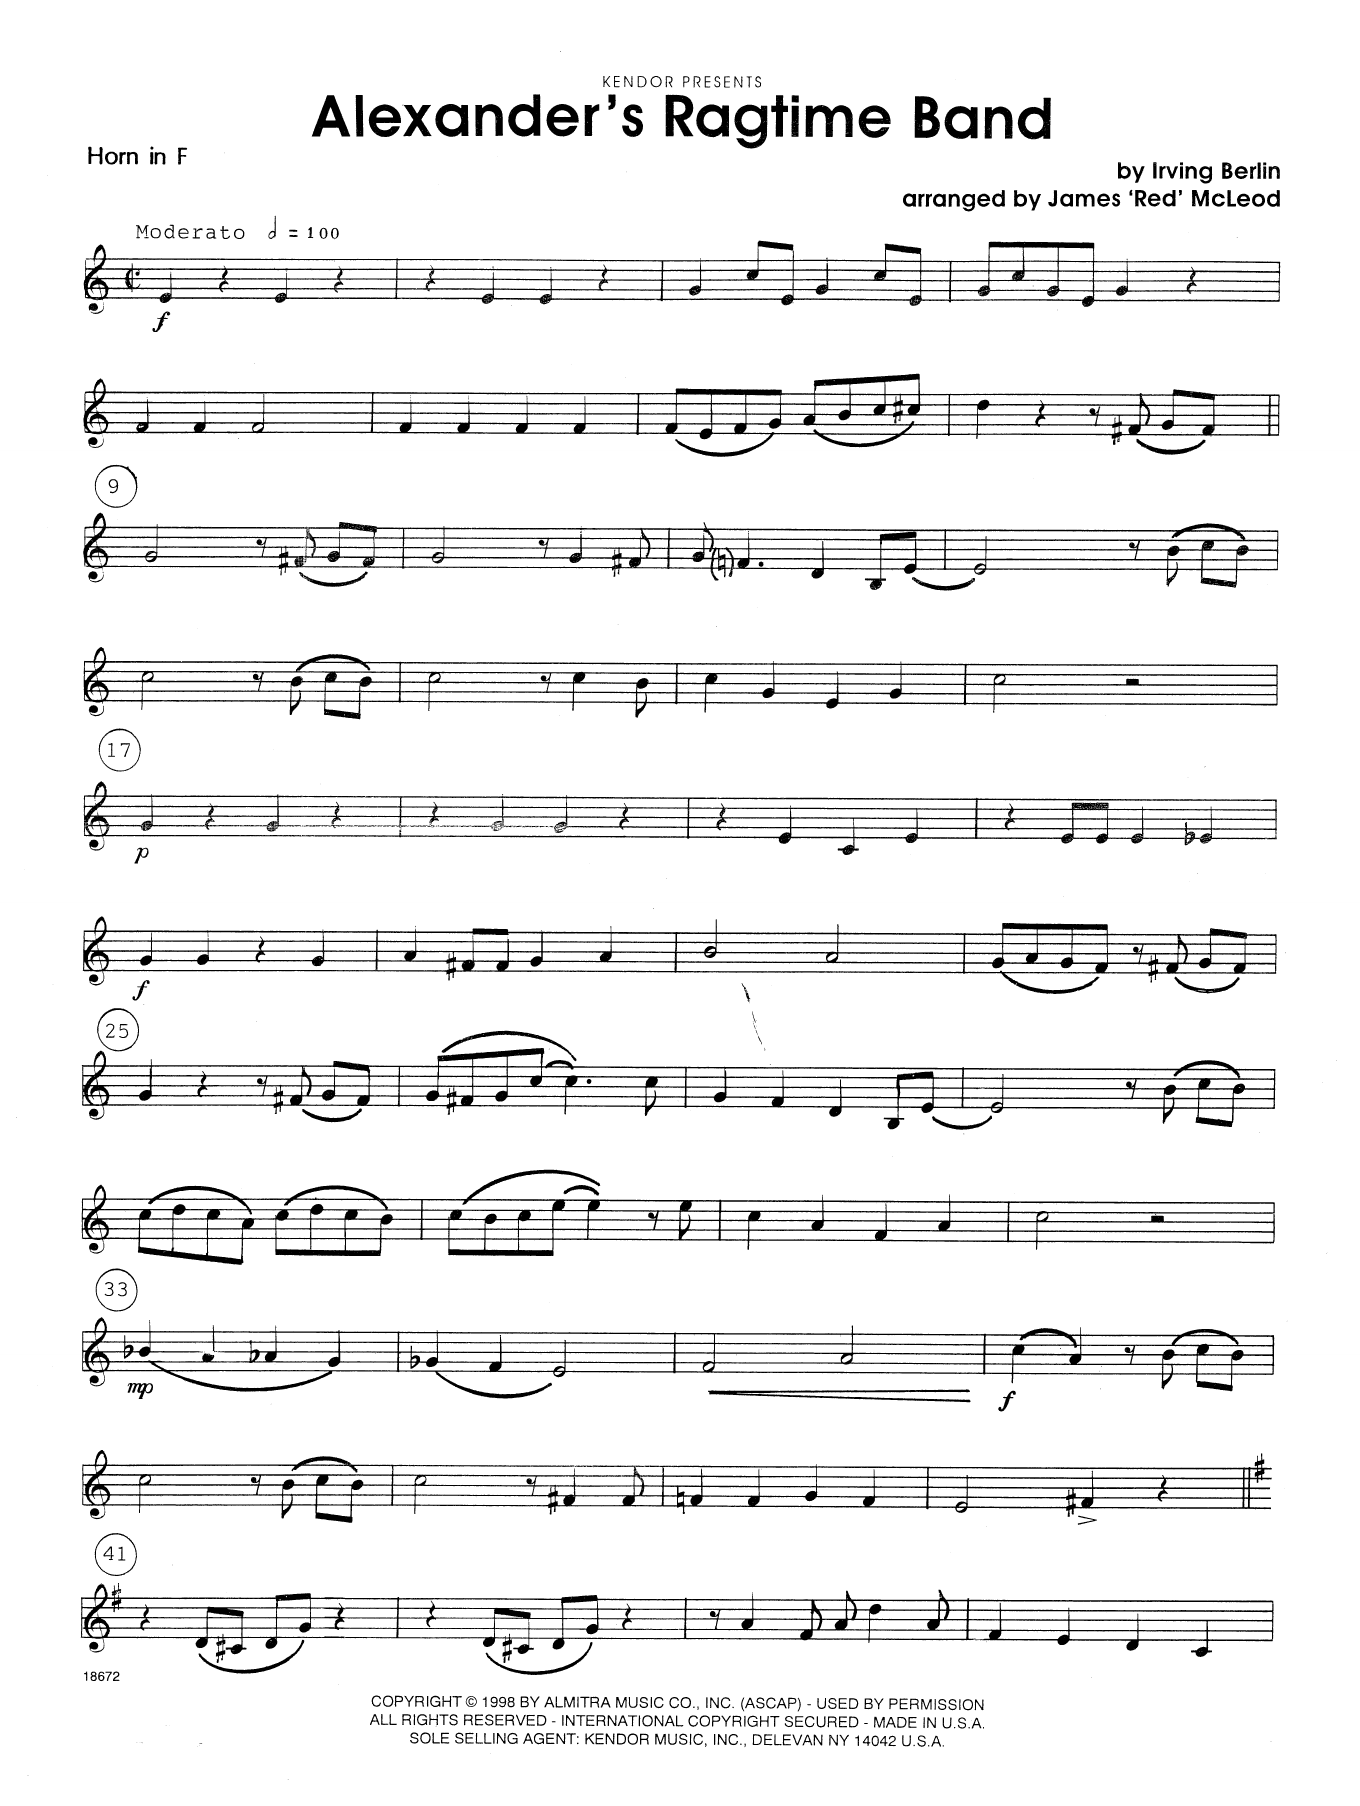 Download James 'Red' McLeod Alexander's Ragtime Band - Horn in F Sheet Music